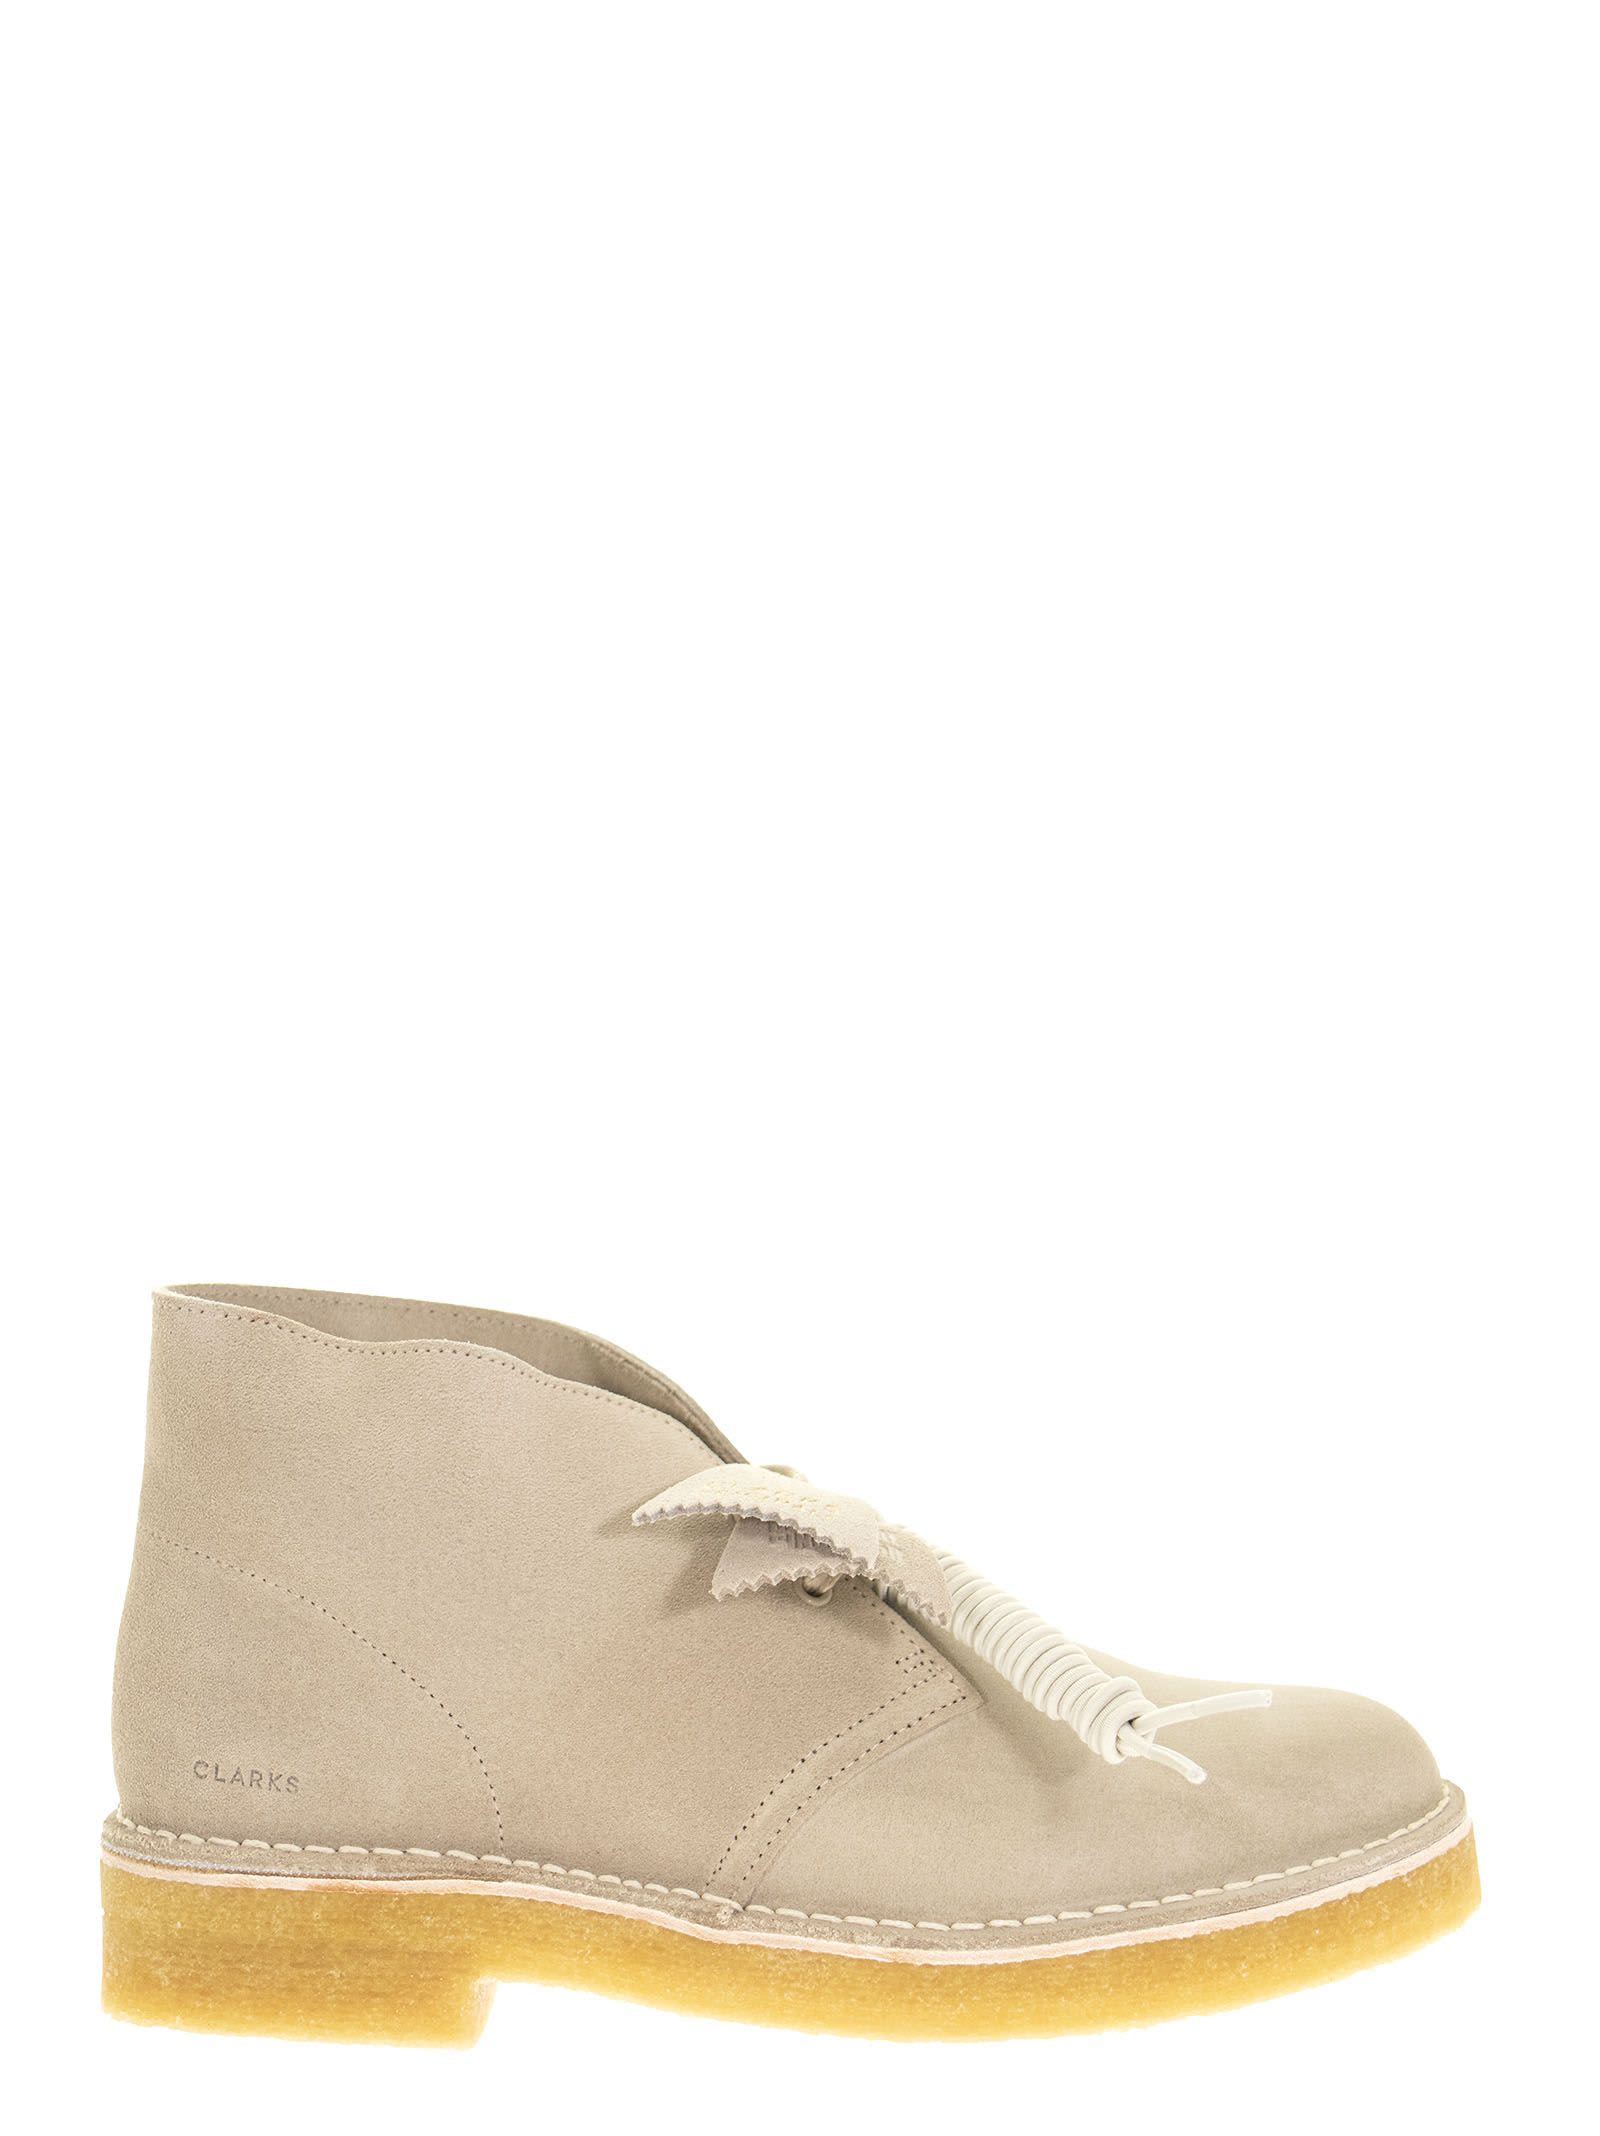 Clarks Desert Boot - Suede Ankle Boot